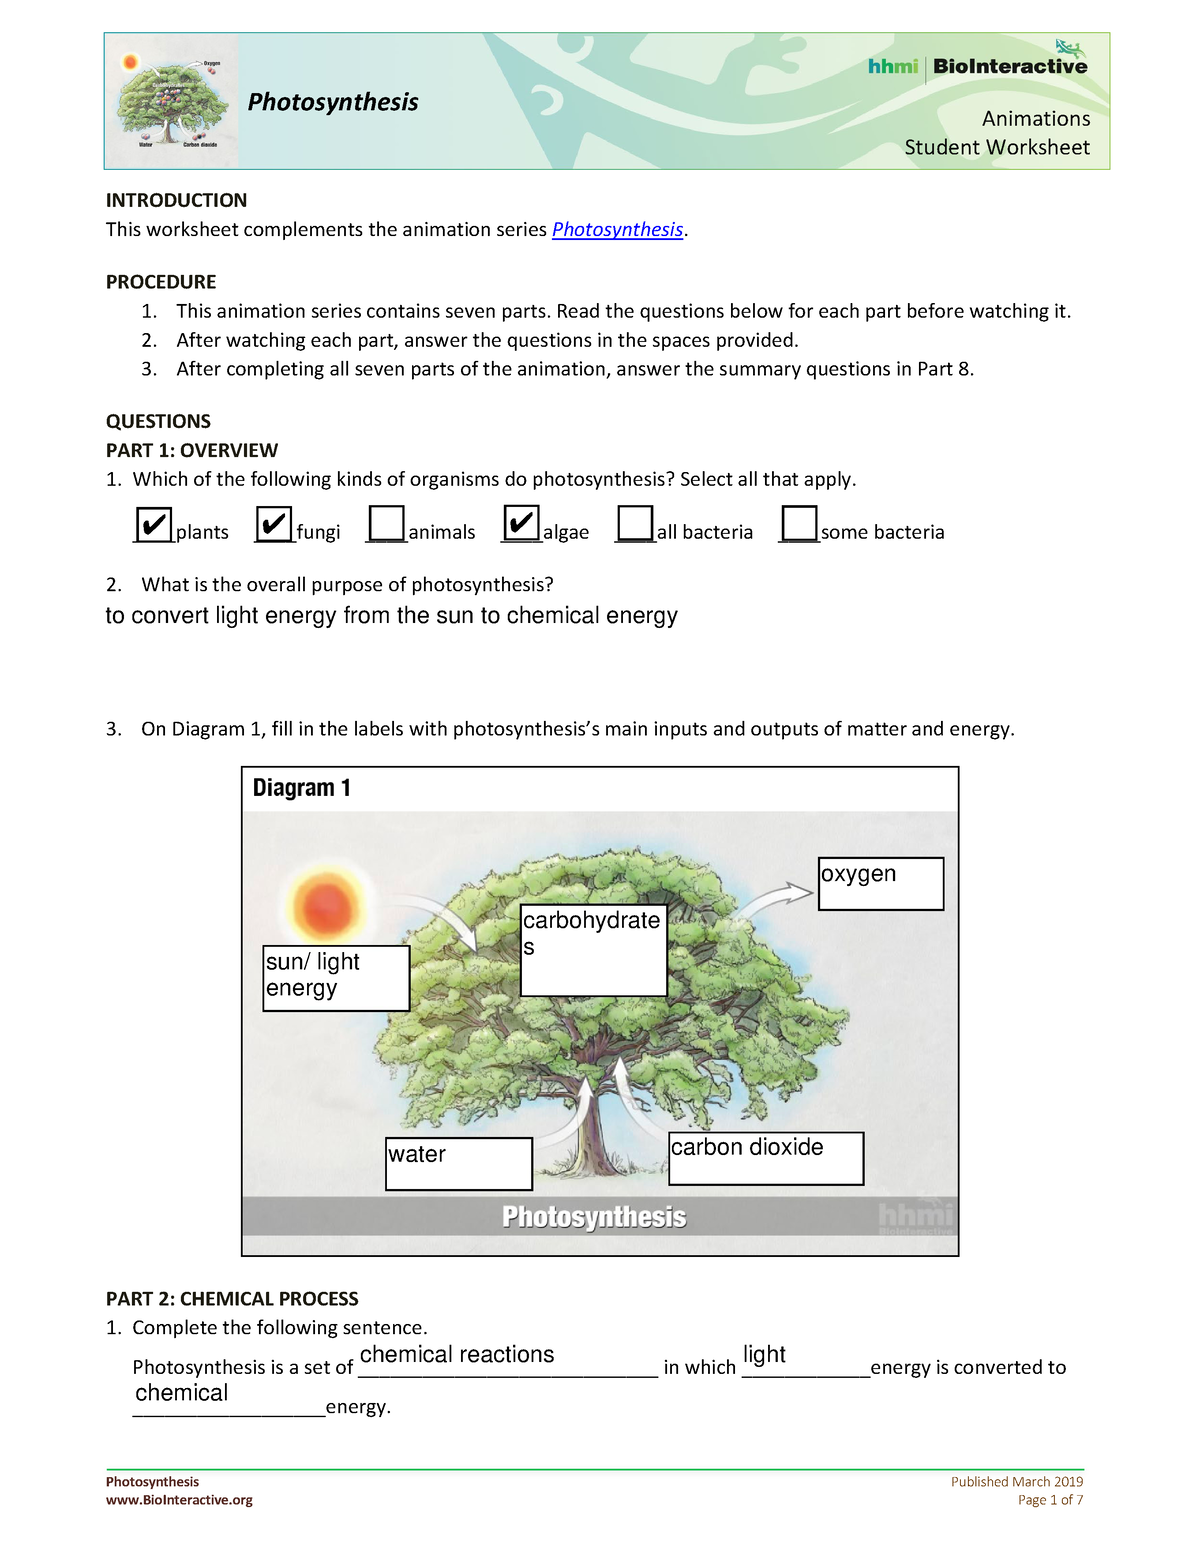 kami-export-photosynthesis-student-ws-animation-photosynthesis-published-march-2019